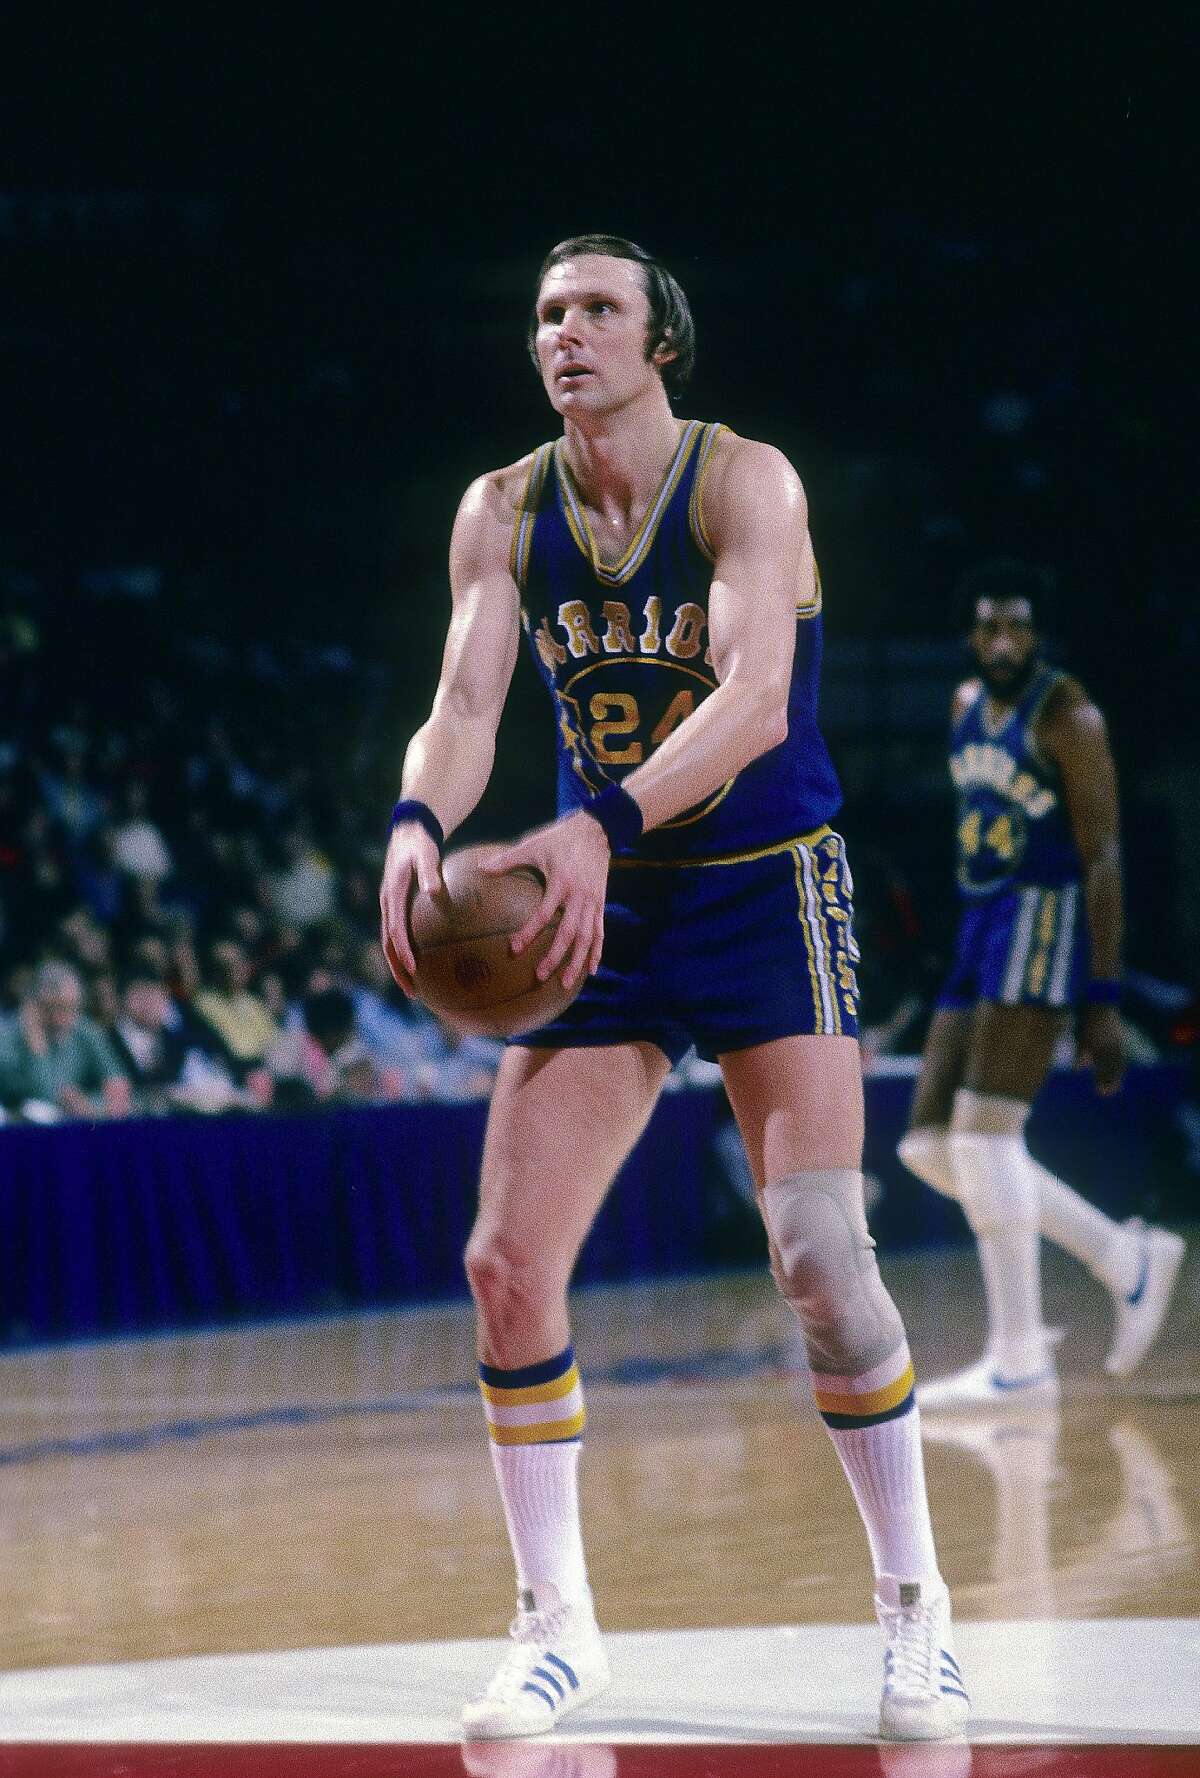 BALTIMORE, MD - CIRCA 1974: Rick Barry #24 of the Golden State Warriors is at the free-throw line against the Washington Bullets during a circa 1974 NBA basketball game at the Capital Center in Baltimore, Maryland. Barry played for the Warriors from 1972 - 77. (Photo by Focus on Sport/Getty Images)